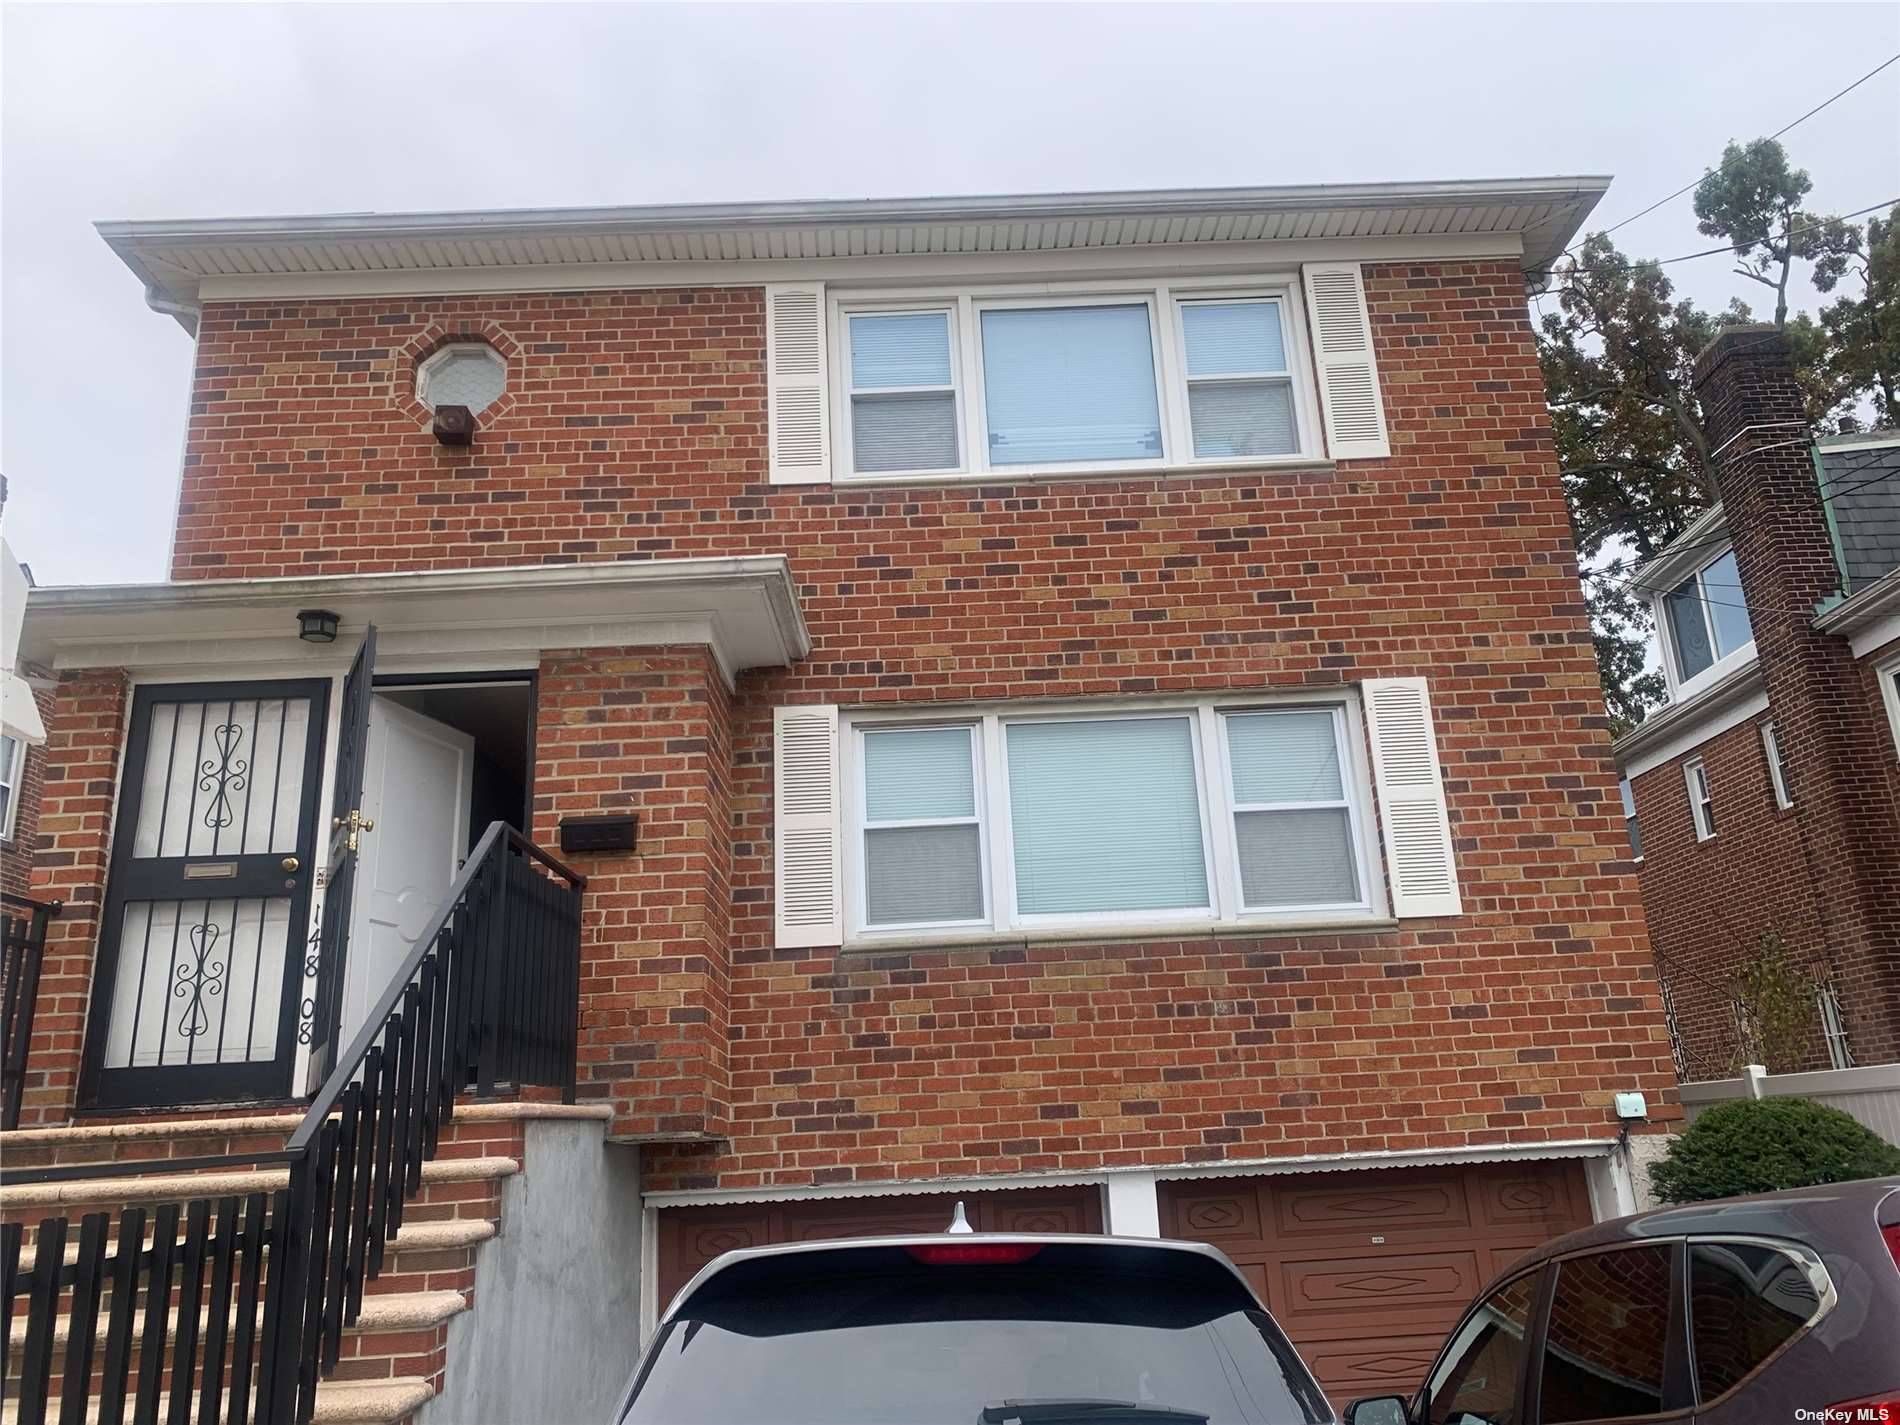 Excellent 2nd fl Apartment in a Beautiful brick house, featuring 3 bedrooms, 2 full bathrooms, eat in kitchen, Living room, Dining room and many closets.